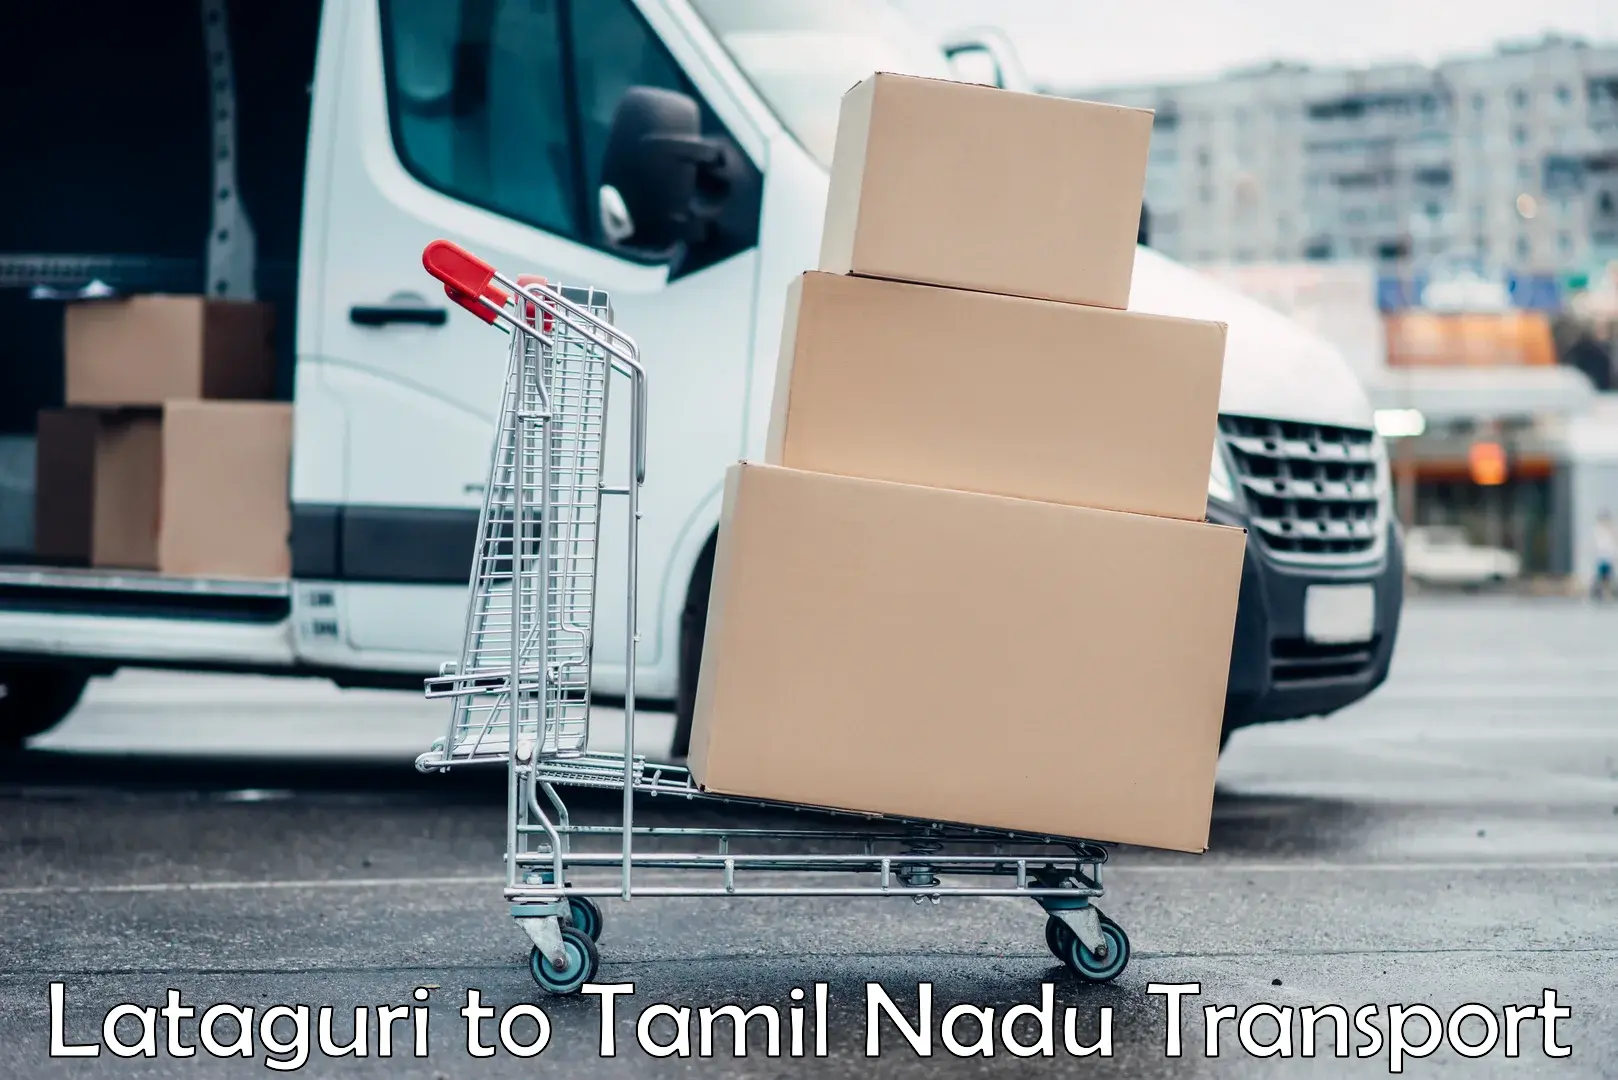 Package delivery services Lataguri to Eraiyur